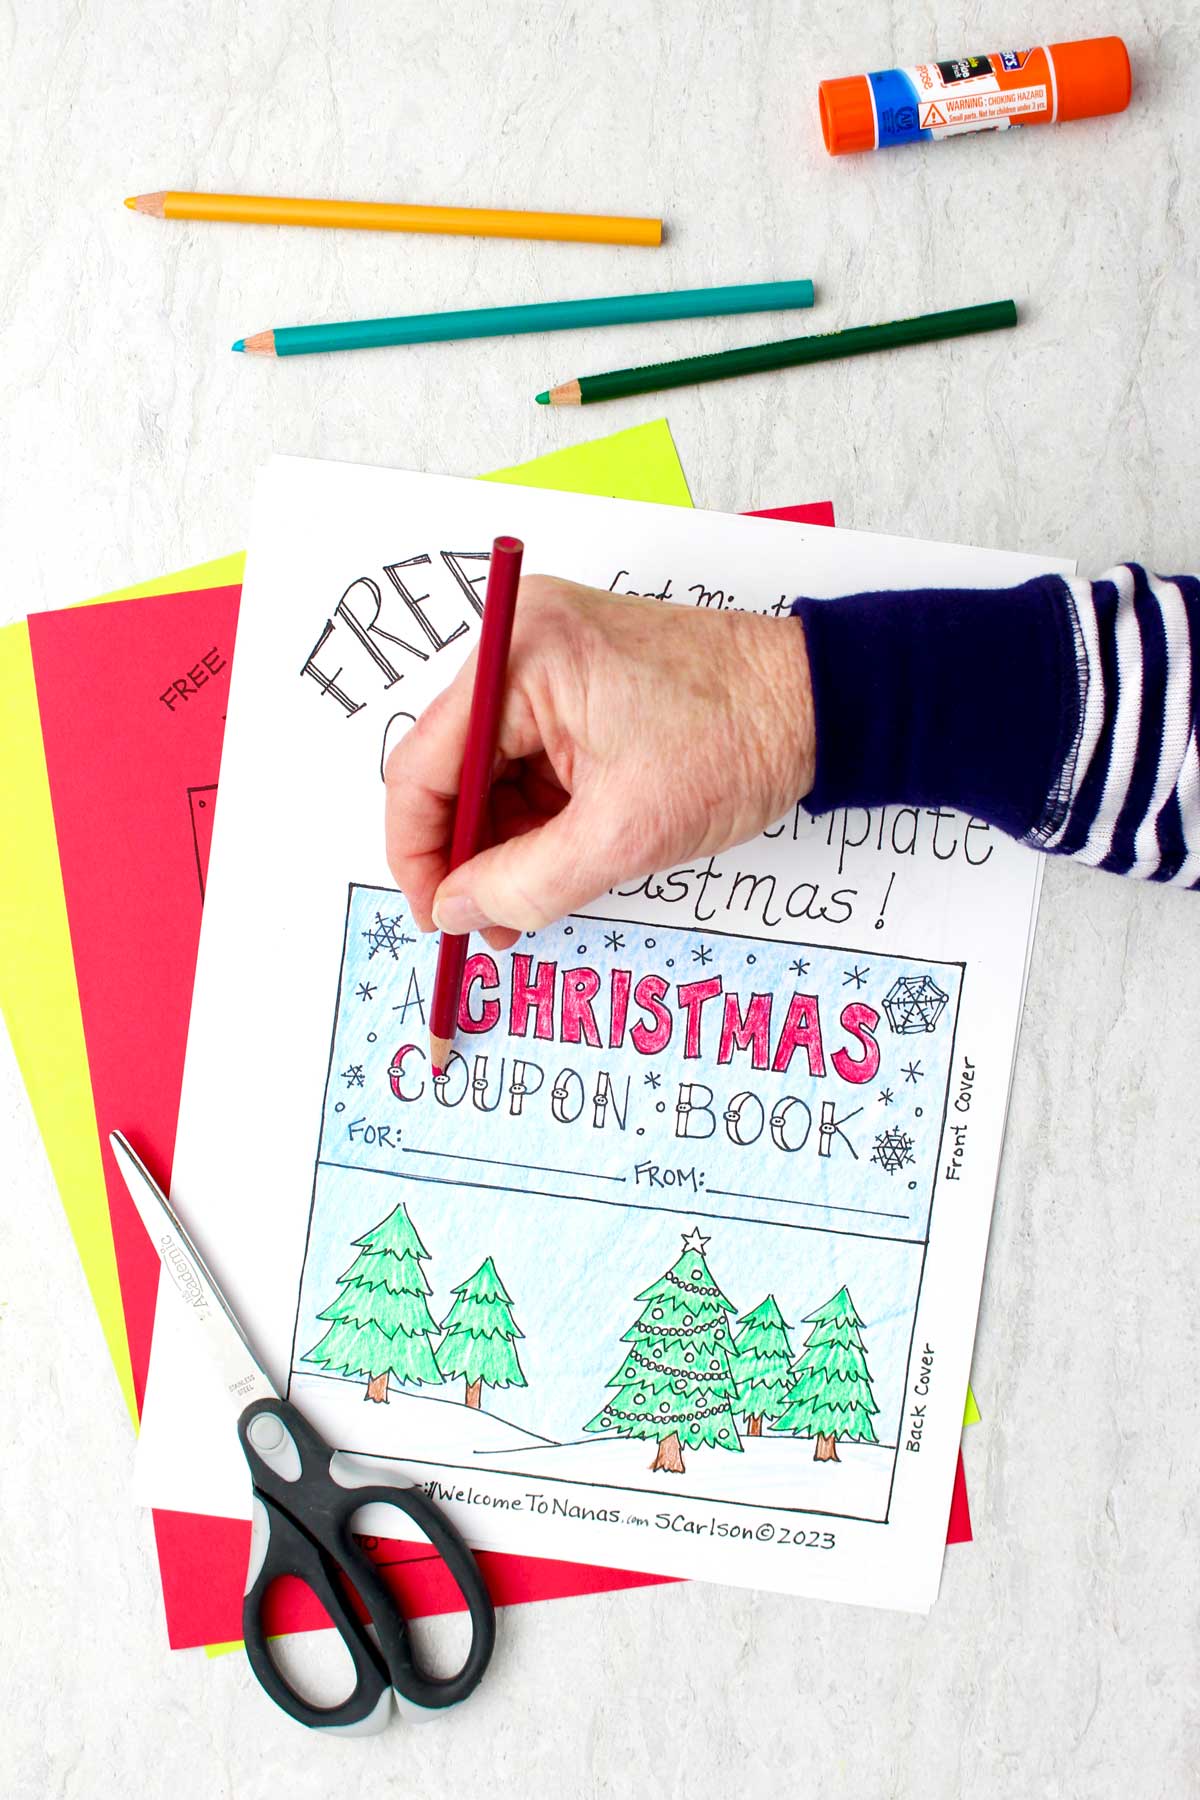 Someone coloring a printed Christmas coupon book template with a red colored pencil.